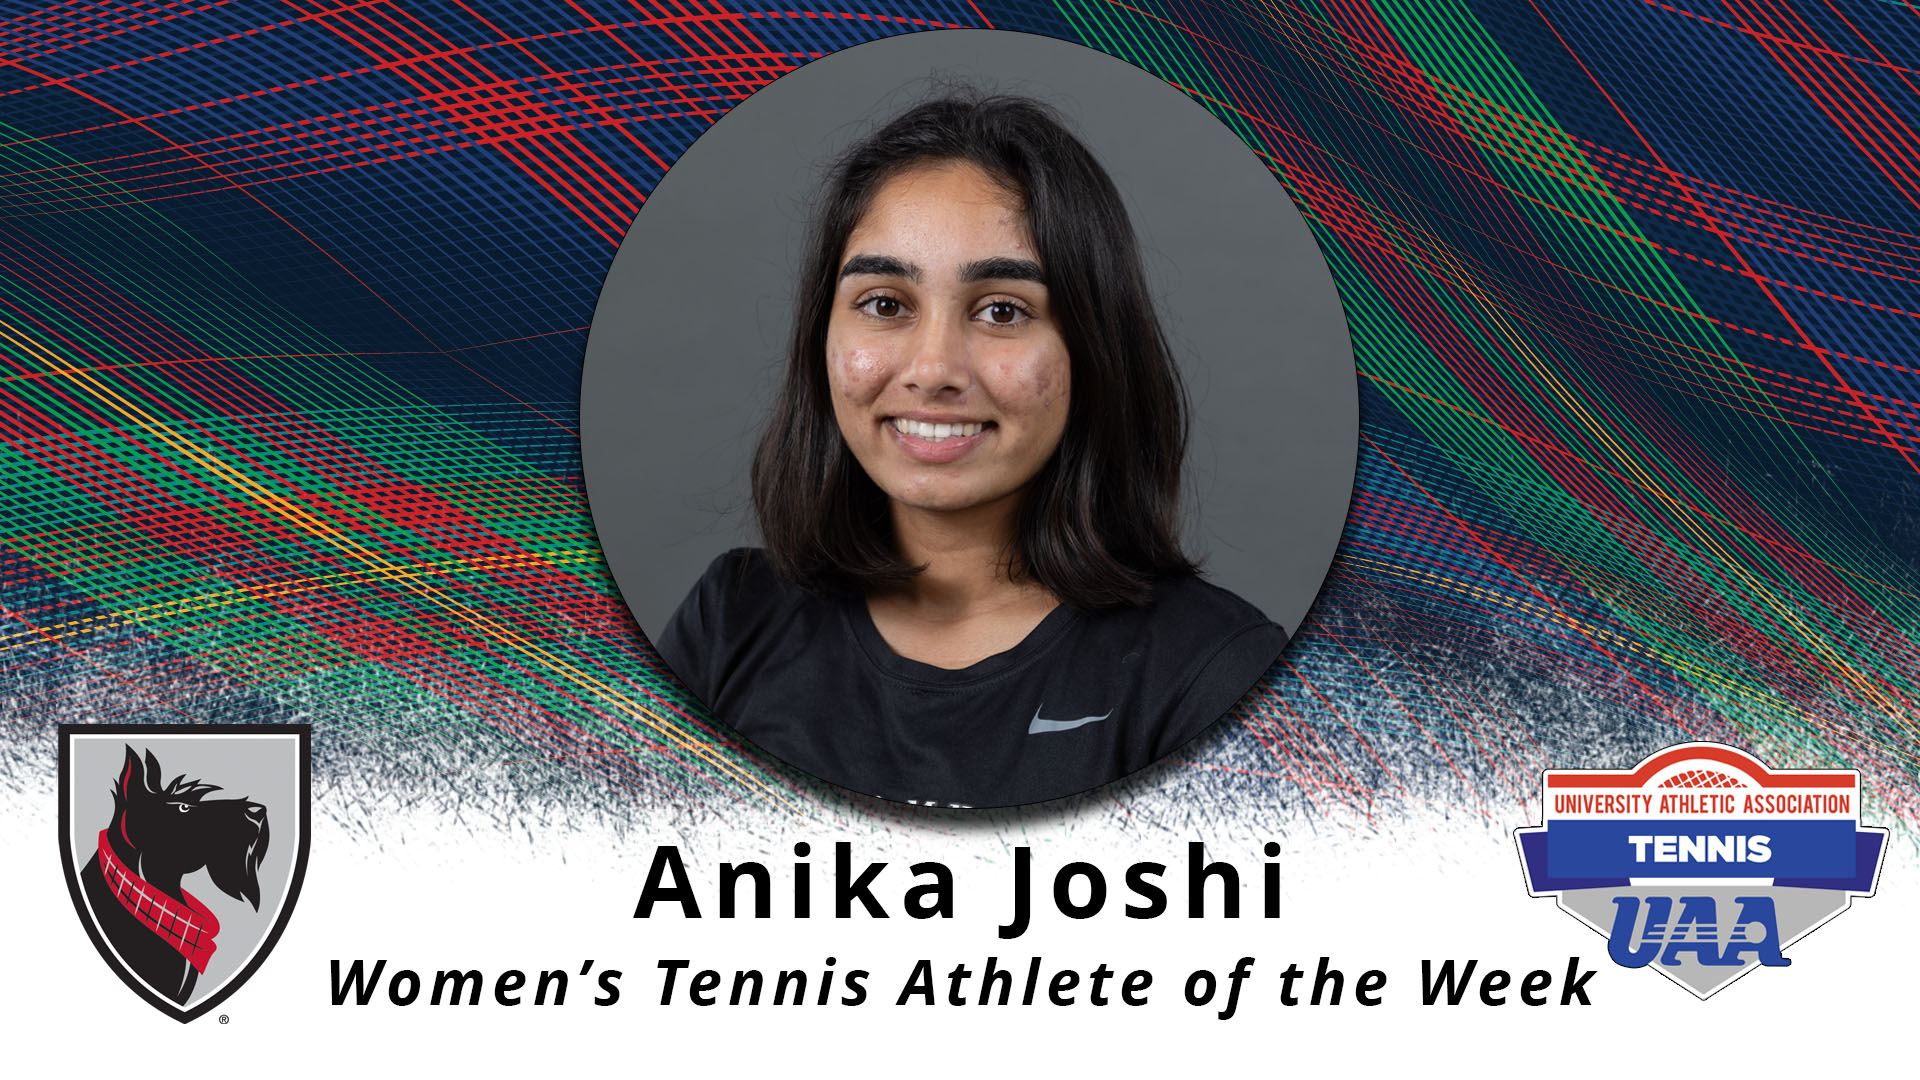 a portrait type photo of a female framed in a circle with text reading Anika Joshi Women's Tennis Athlete of the Week